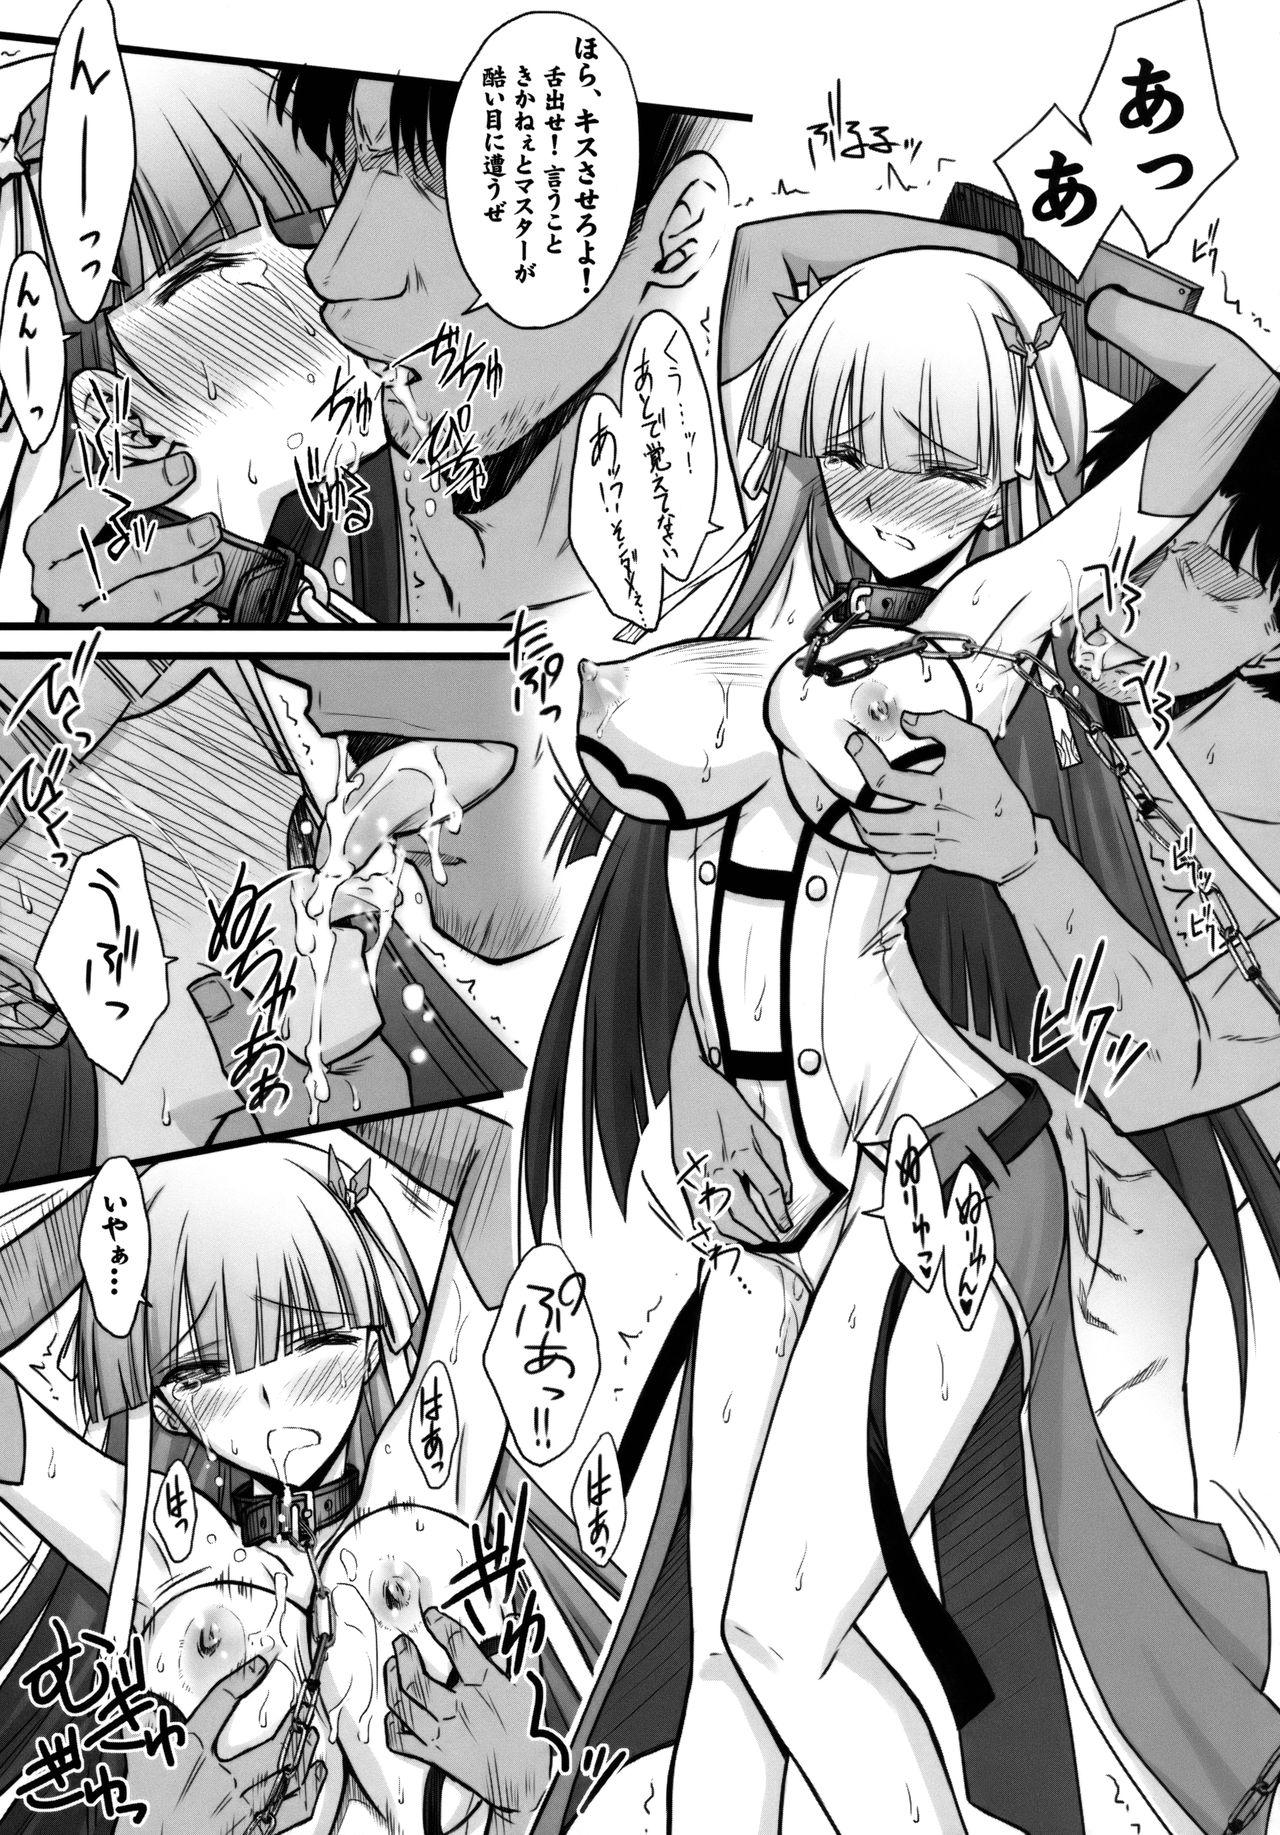 1080p Toraware Seijou - Fate grand order Pounded - Page 8